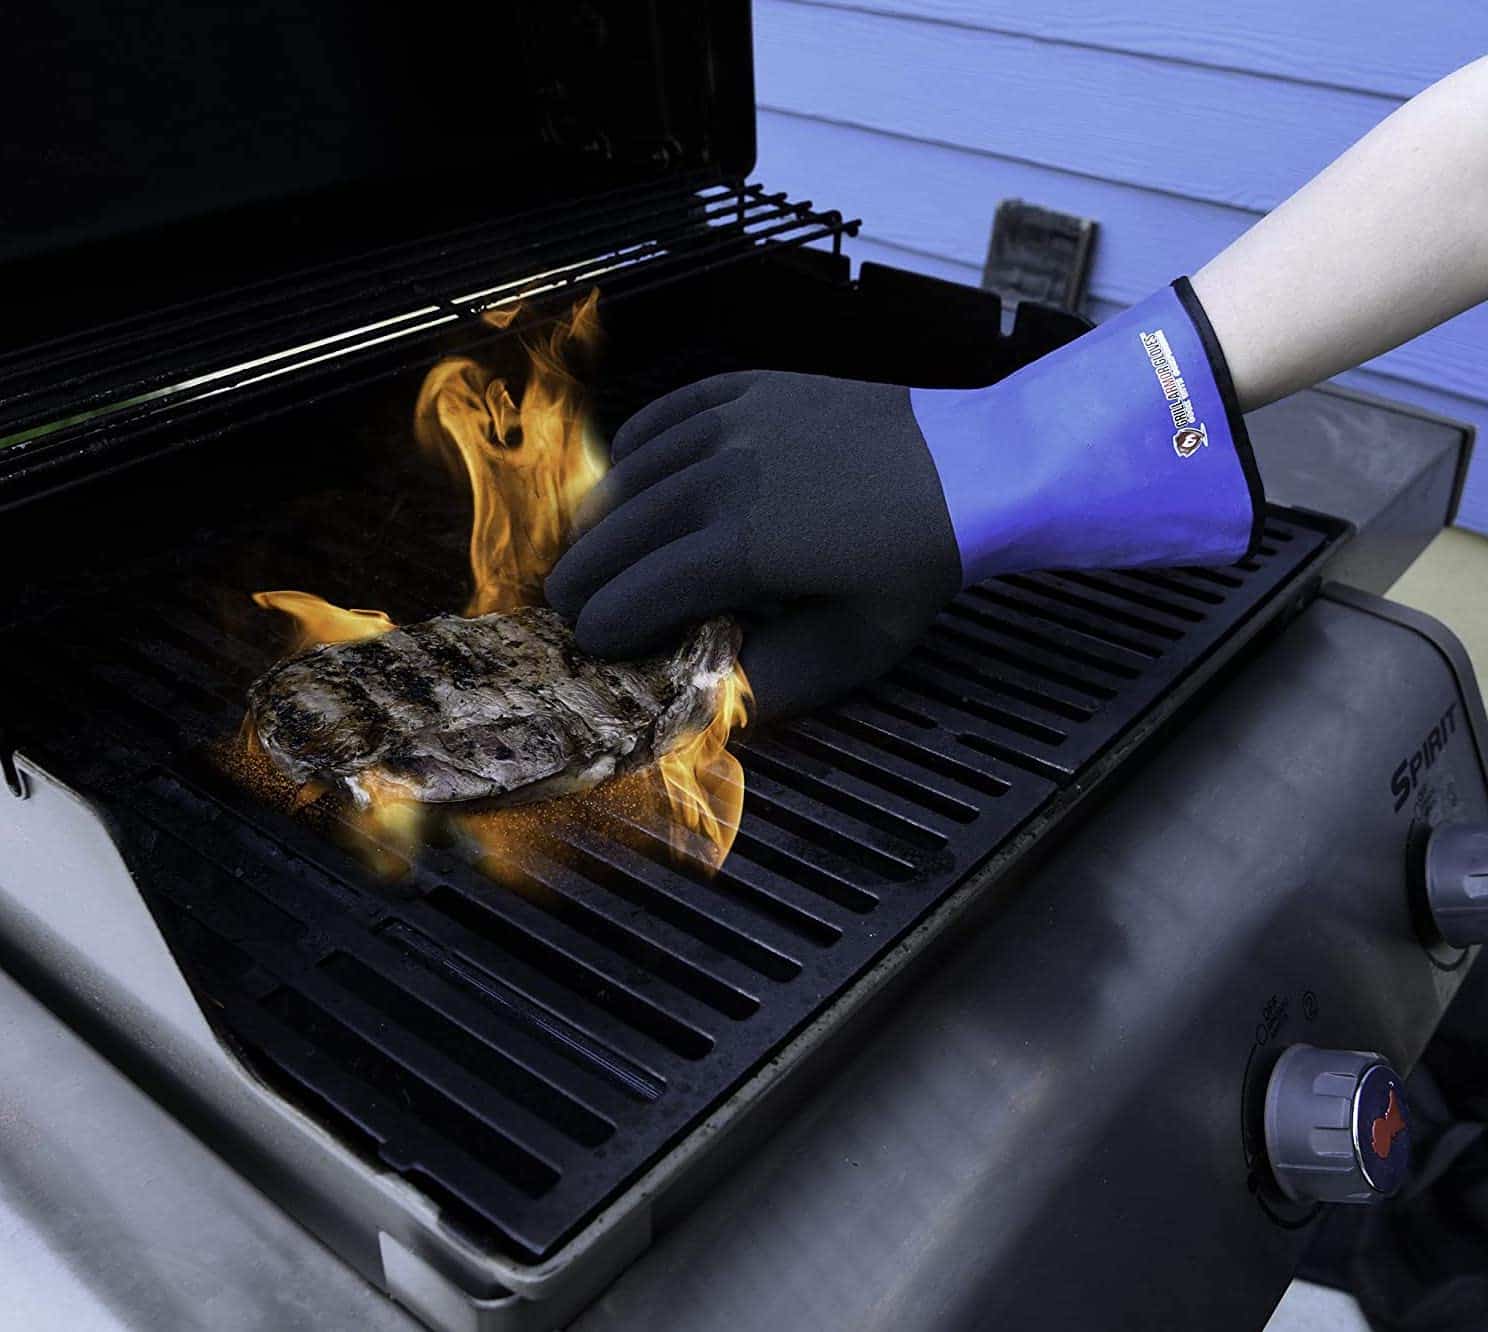 Top 10 Best Oven Mitts Reviews | Guide